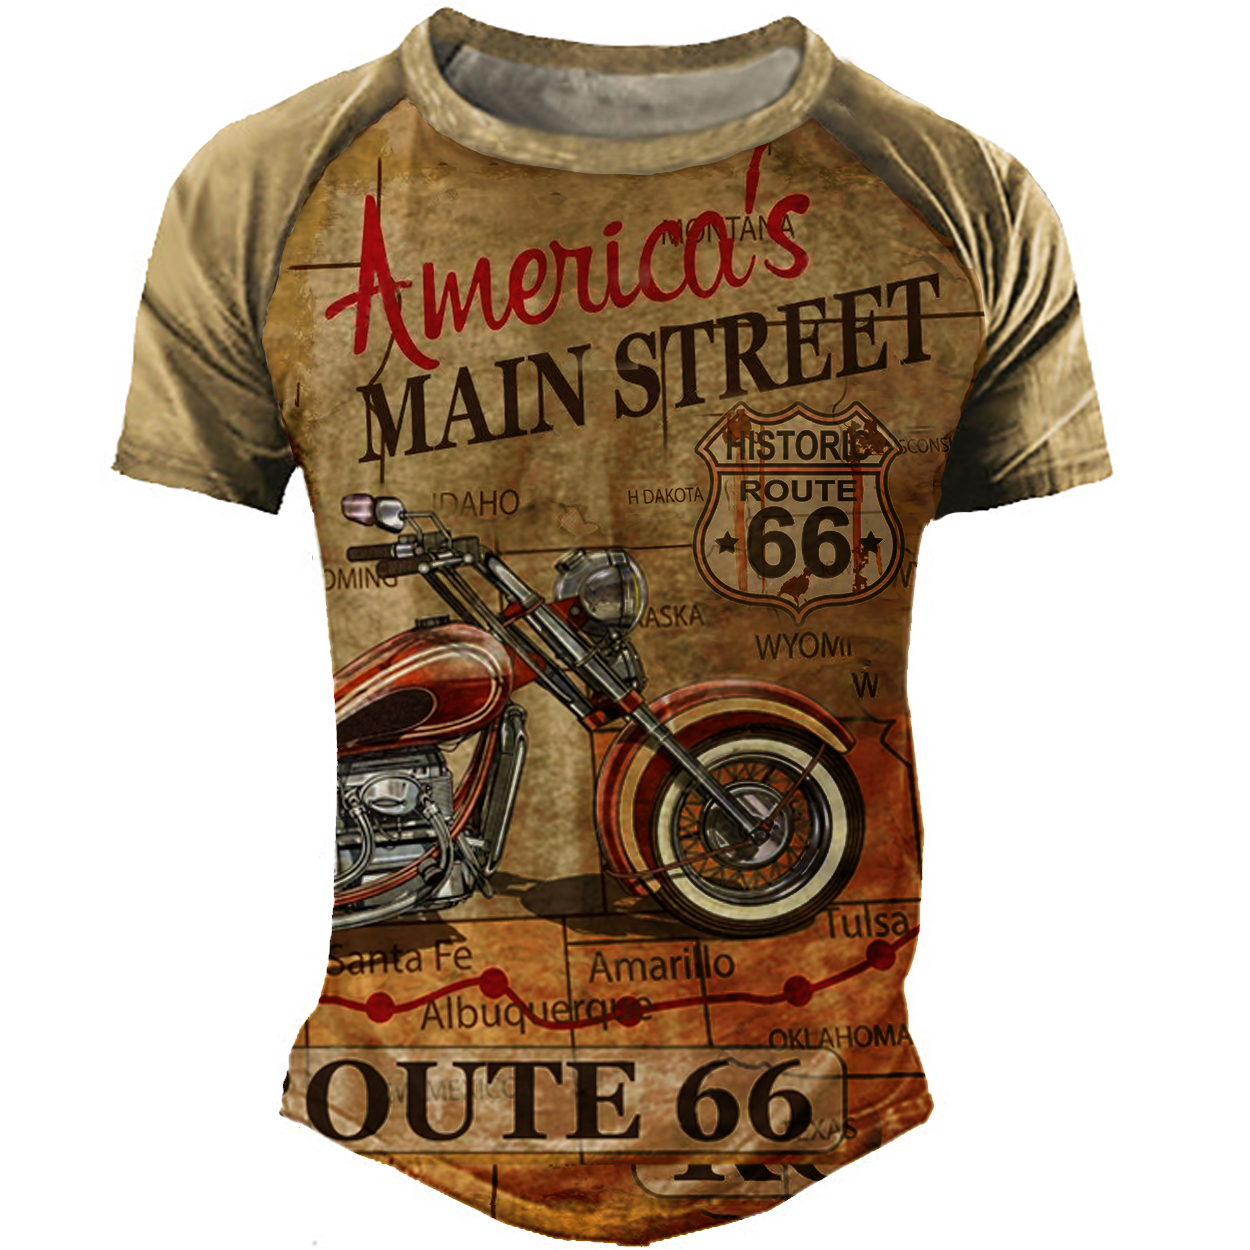 Men's Outdoor Vintage Route Chic 66 Motorcycle T-shirt